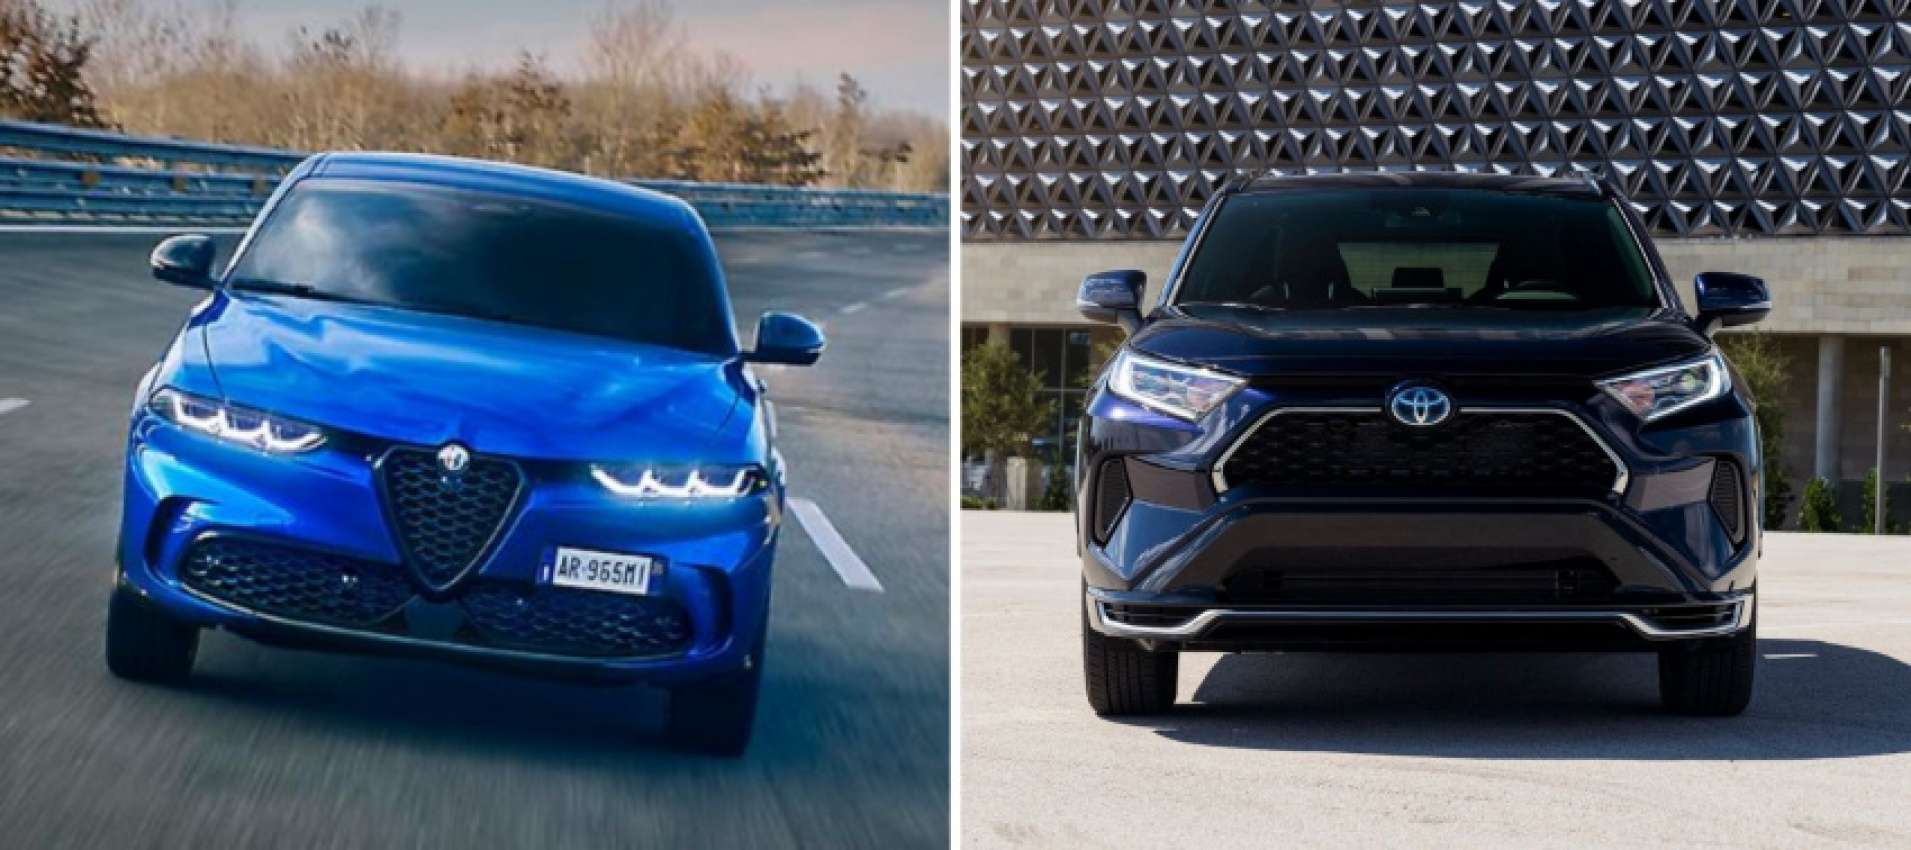 alfa romeo, android, autos, cars, toyota, amazon, rav4, tonale, toyota rav4, amazon, android, 2023 alfa romeo tonale completely embarrassed by the 2022 toyota rav4 prime despite its (expected) high luxury price